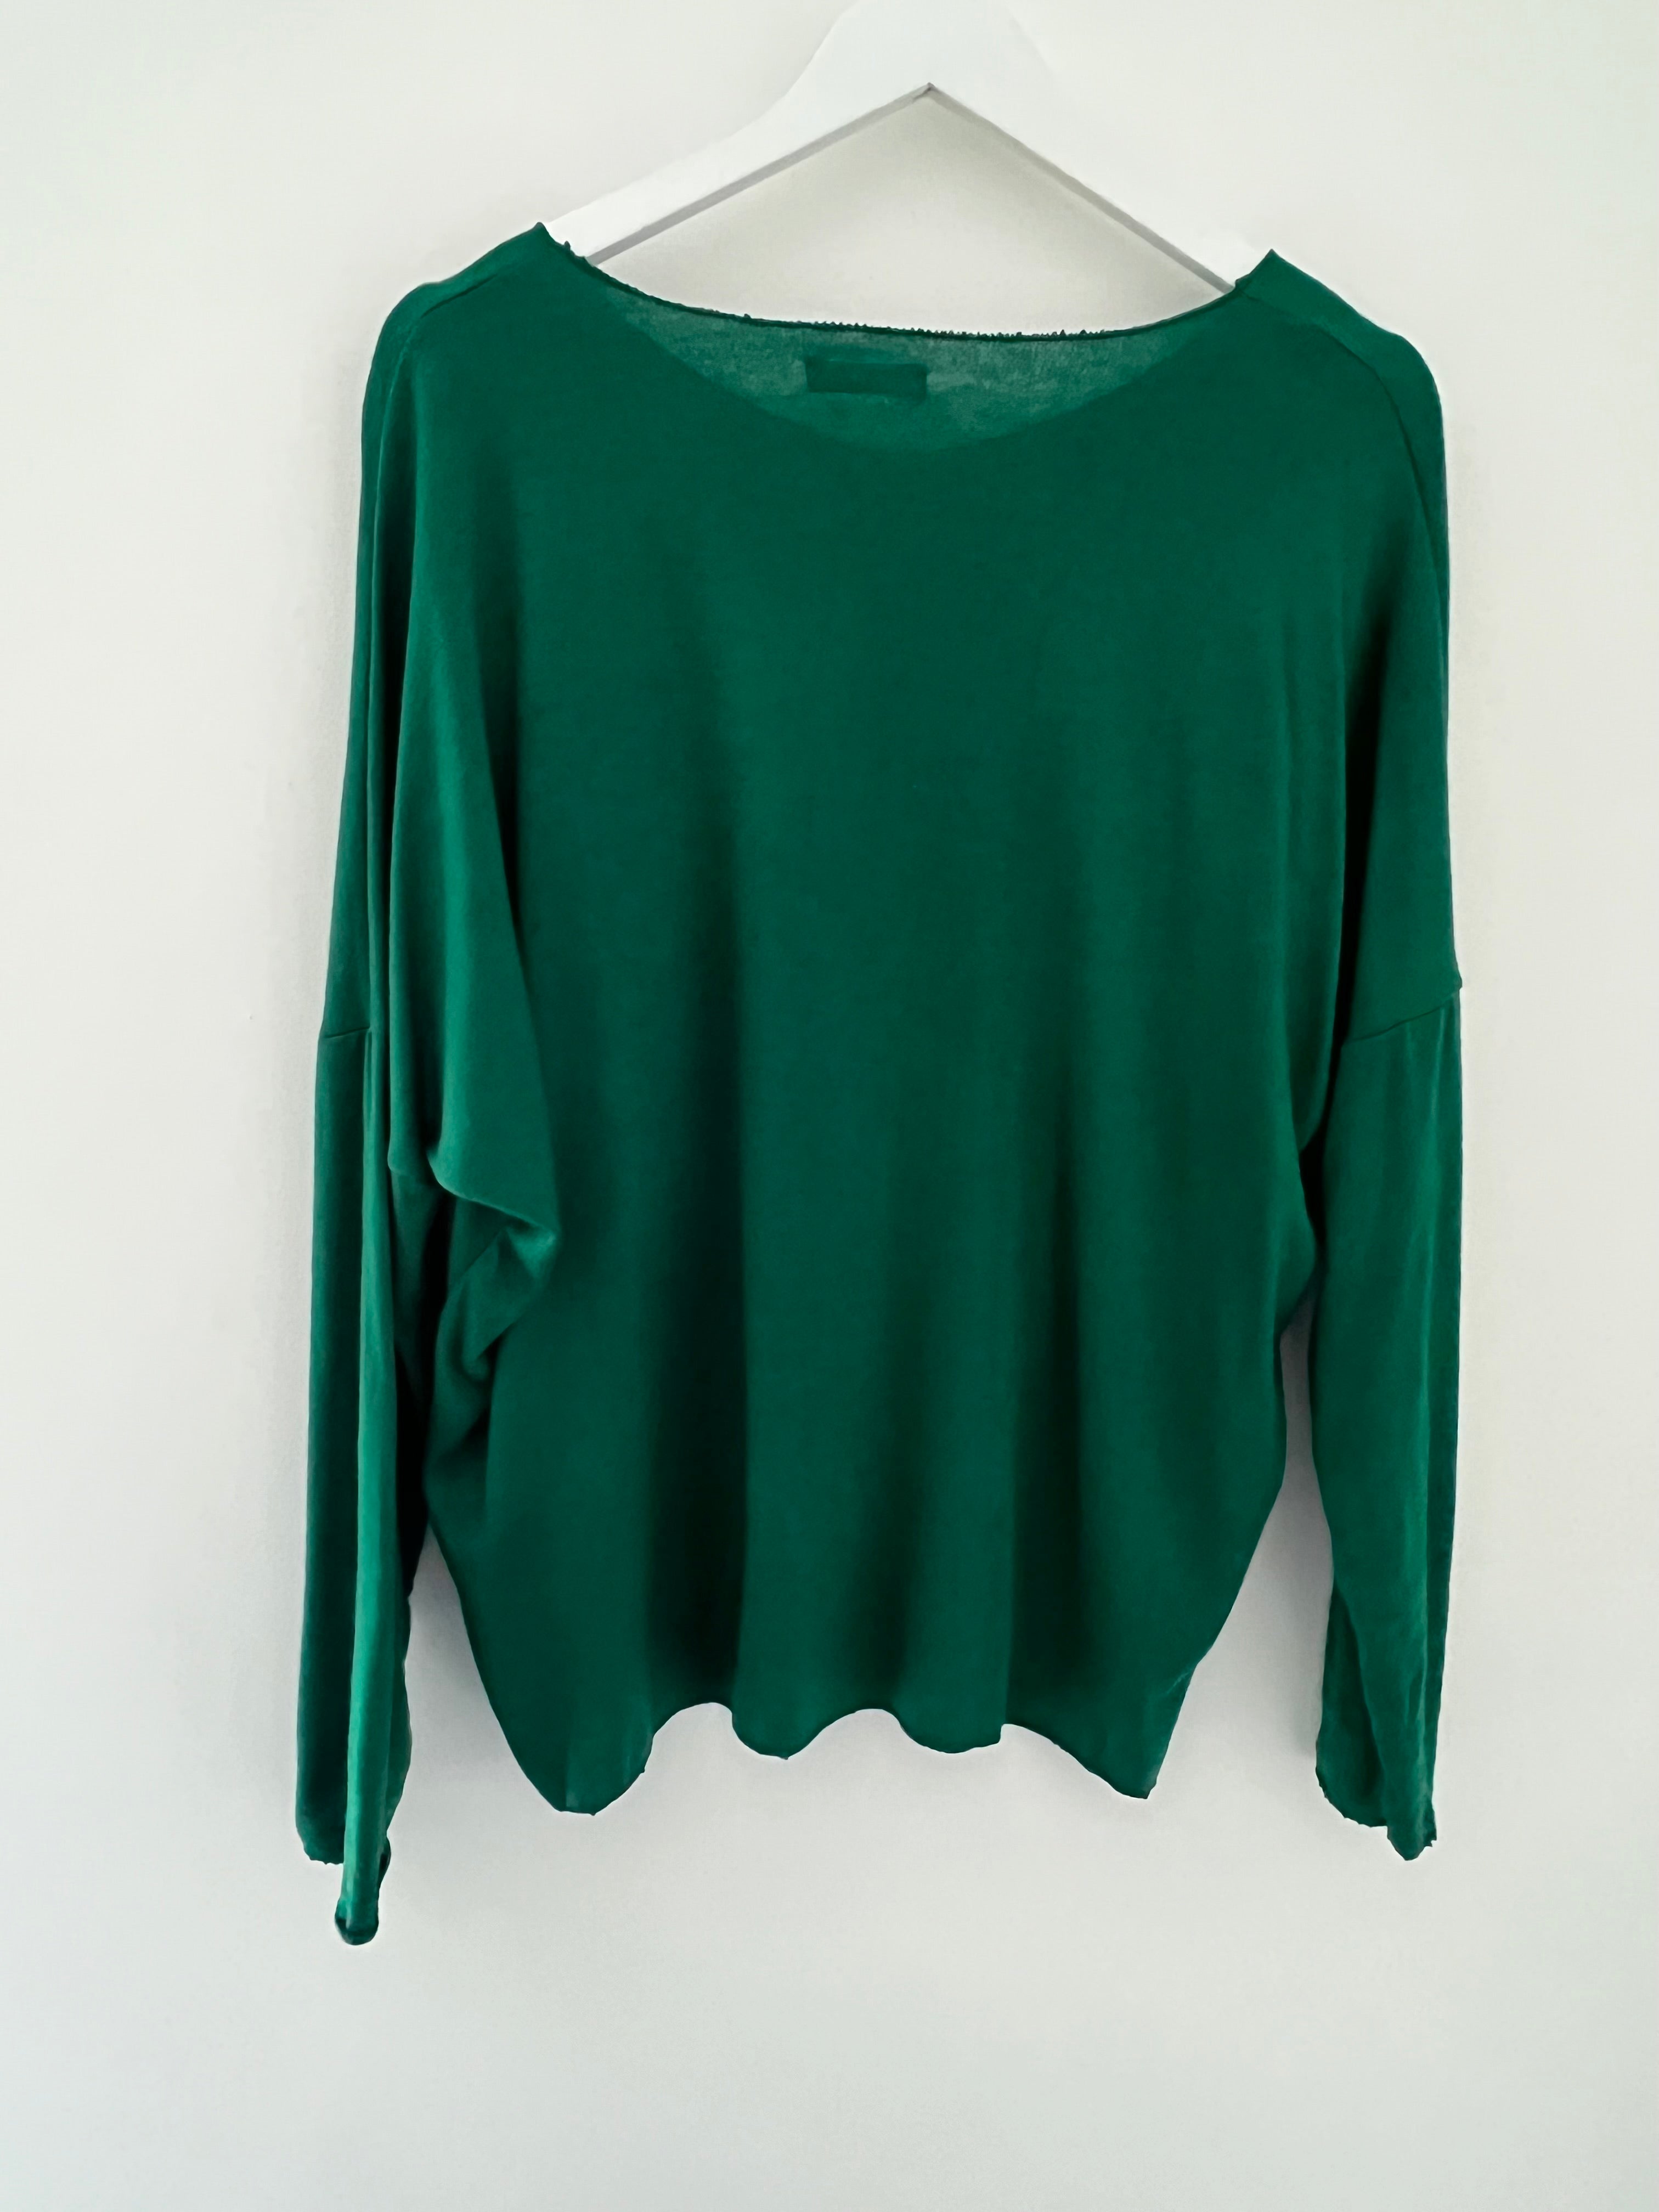 Silver Star Jumper in Forest Green